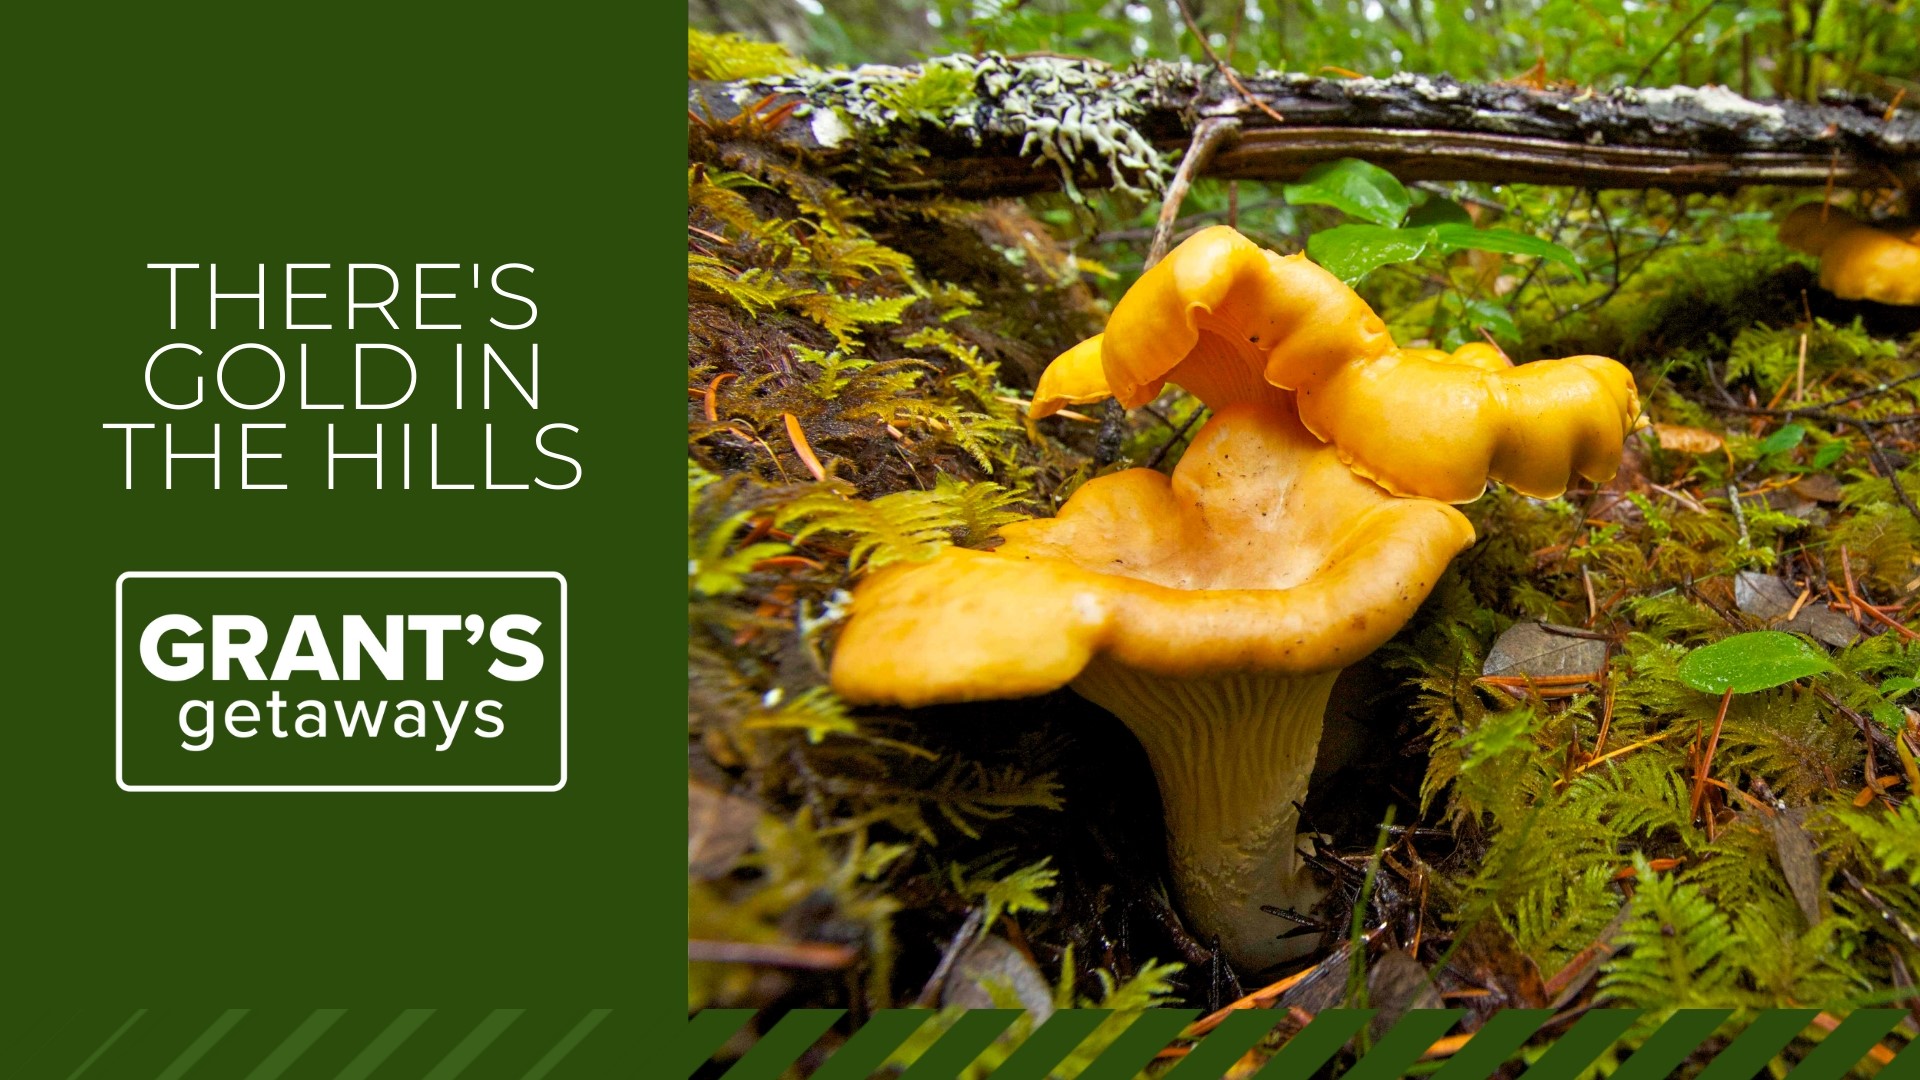 The Oregon Department of Forestry allows residents to harvest up to one gallon of wild mushrooms on state forestlands.